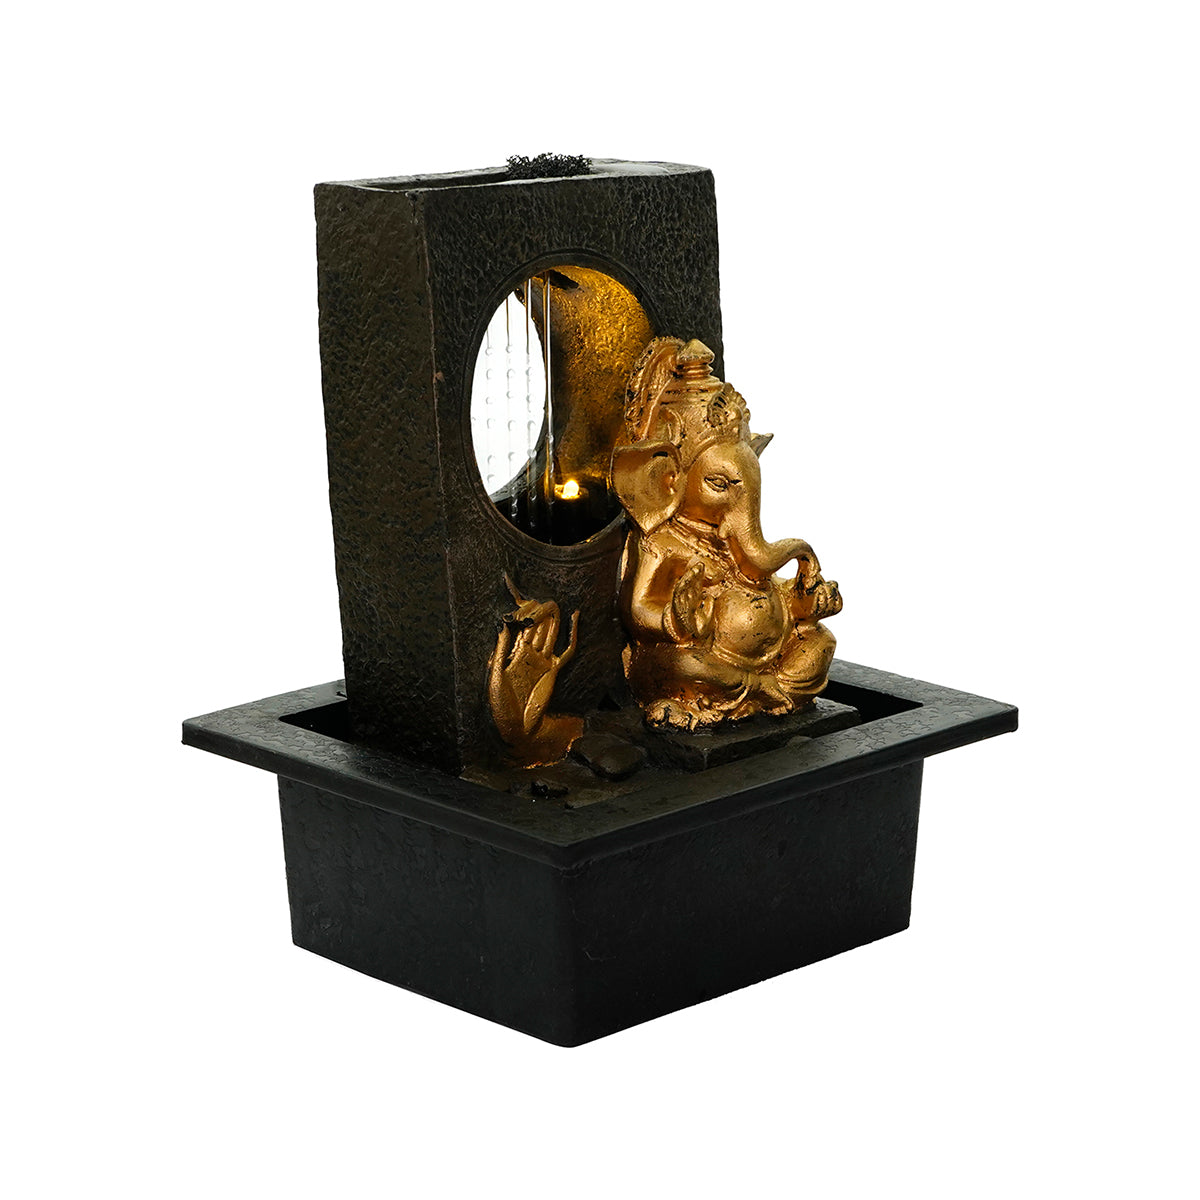 Polystone Black and Golden Lord Ganesha Statue Water Fountain With Light Home/Office Decor 3